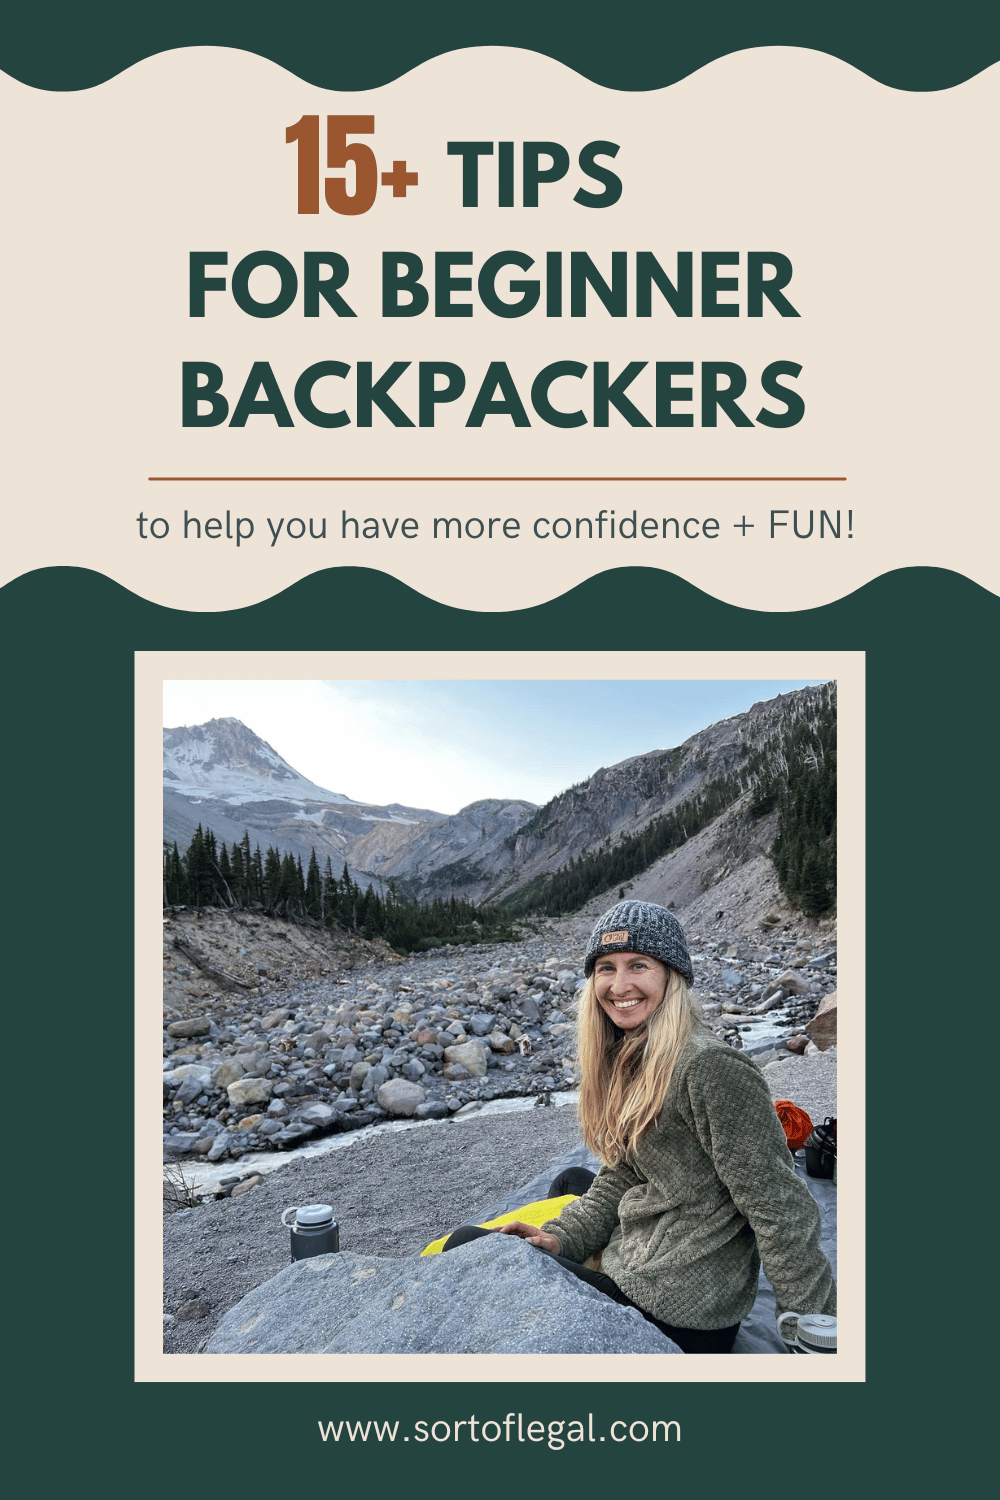 Title Image - 15+ Tips for Beginner Backpackers - Larissa B in beanie with Mt Hood in background